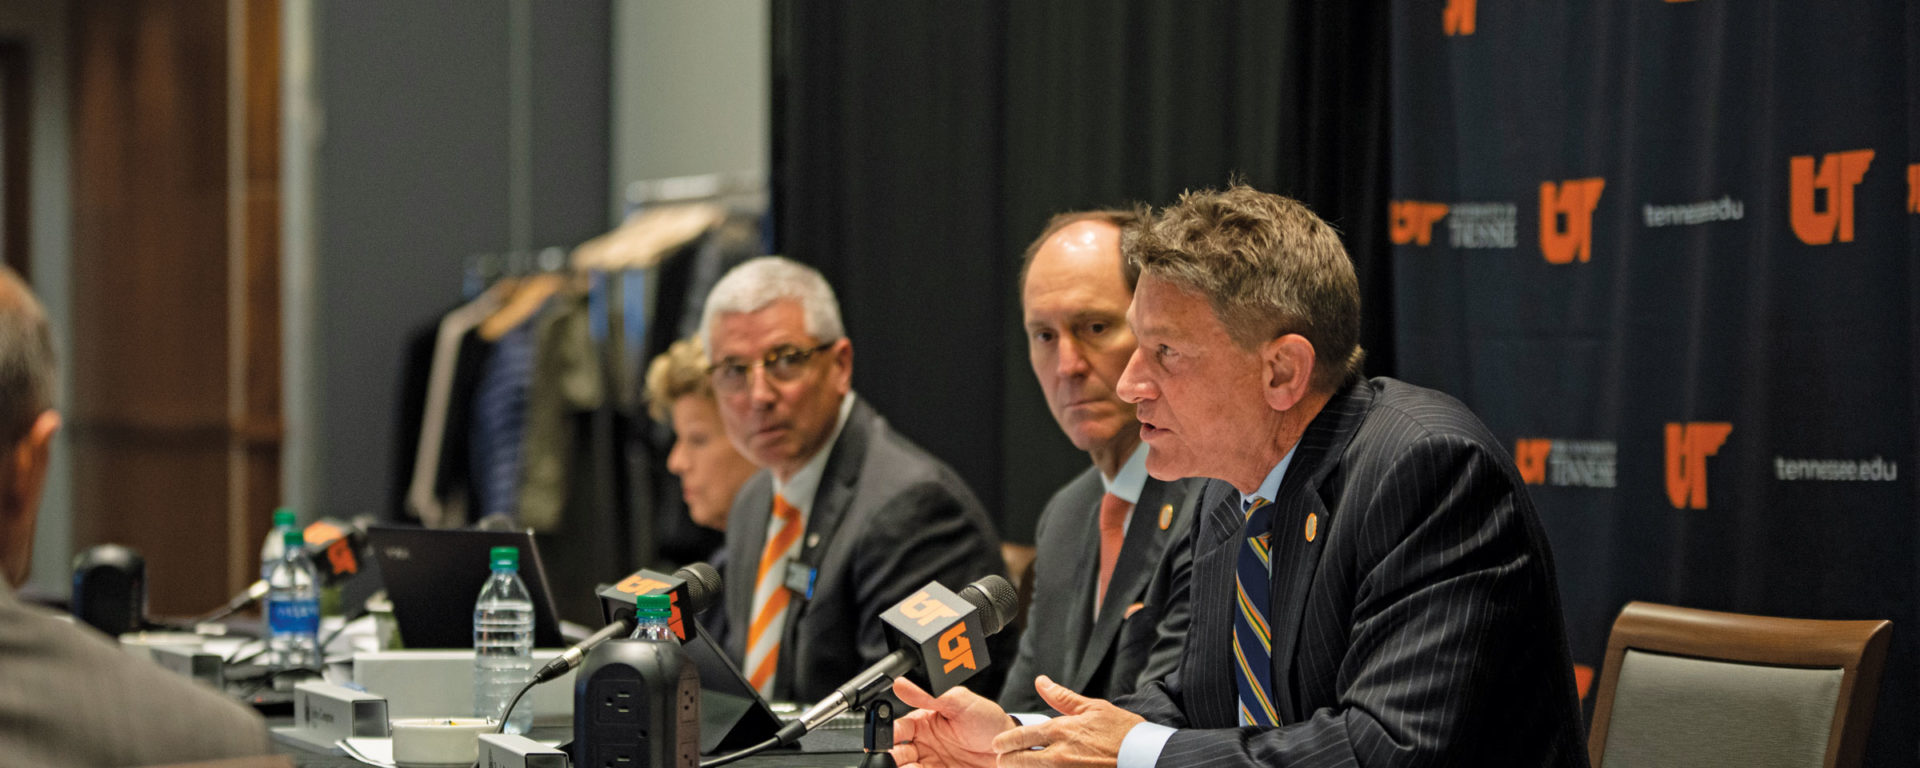 Randy Boyd with John Compton and Donnie Smith at the Fall 2019 Board of Trustees meeting